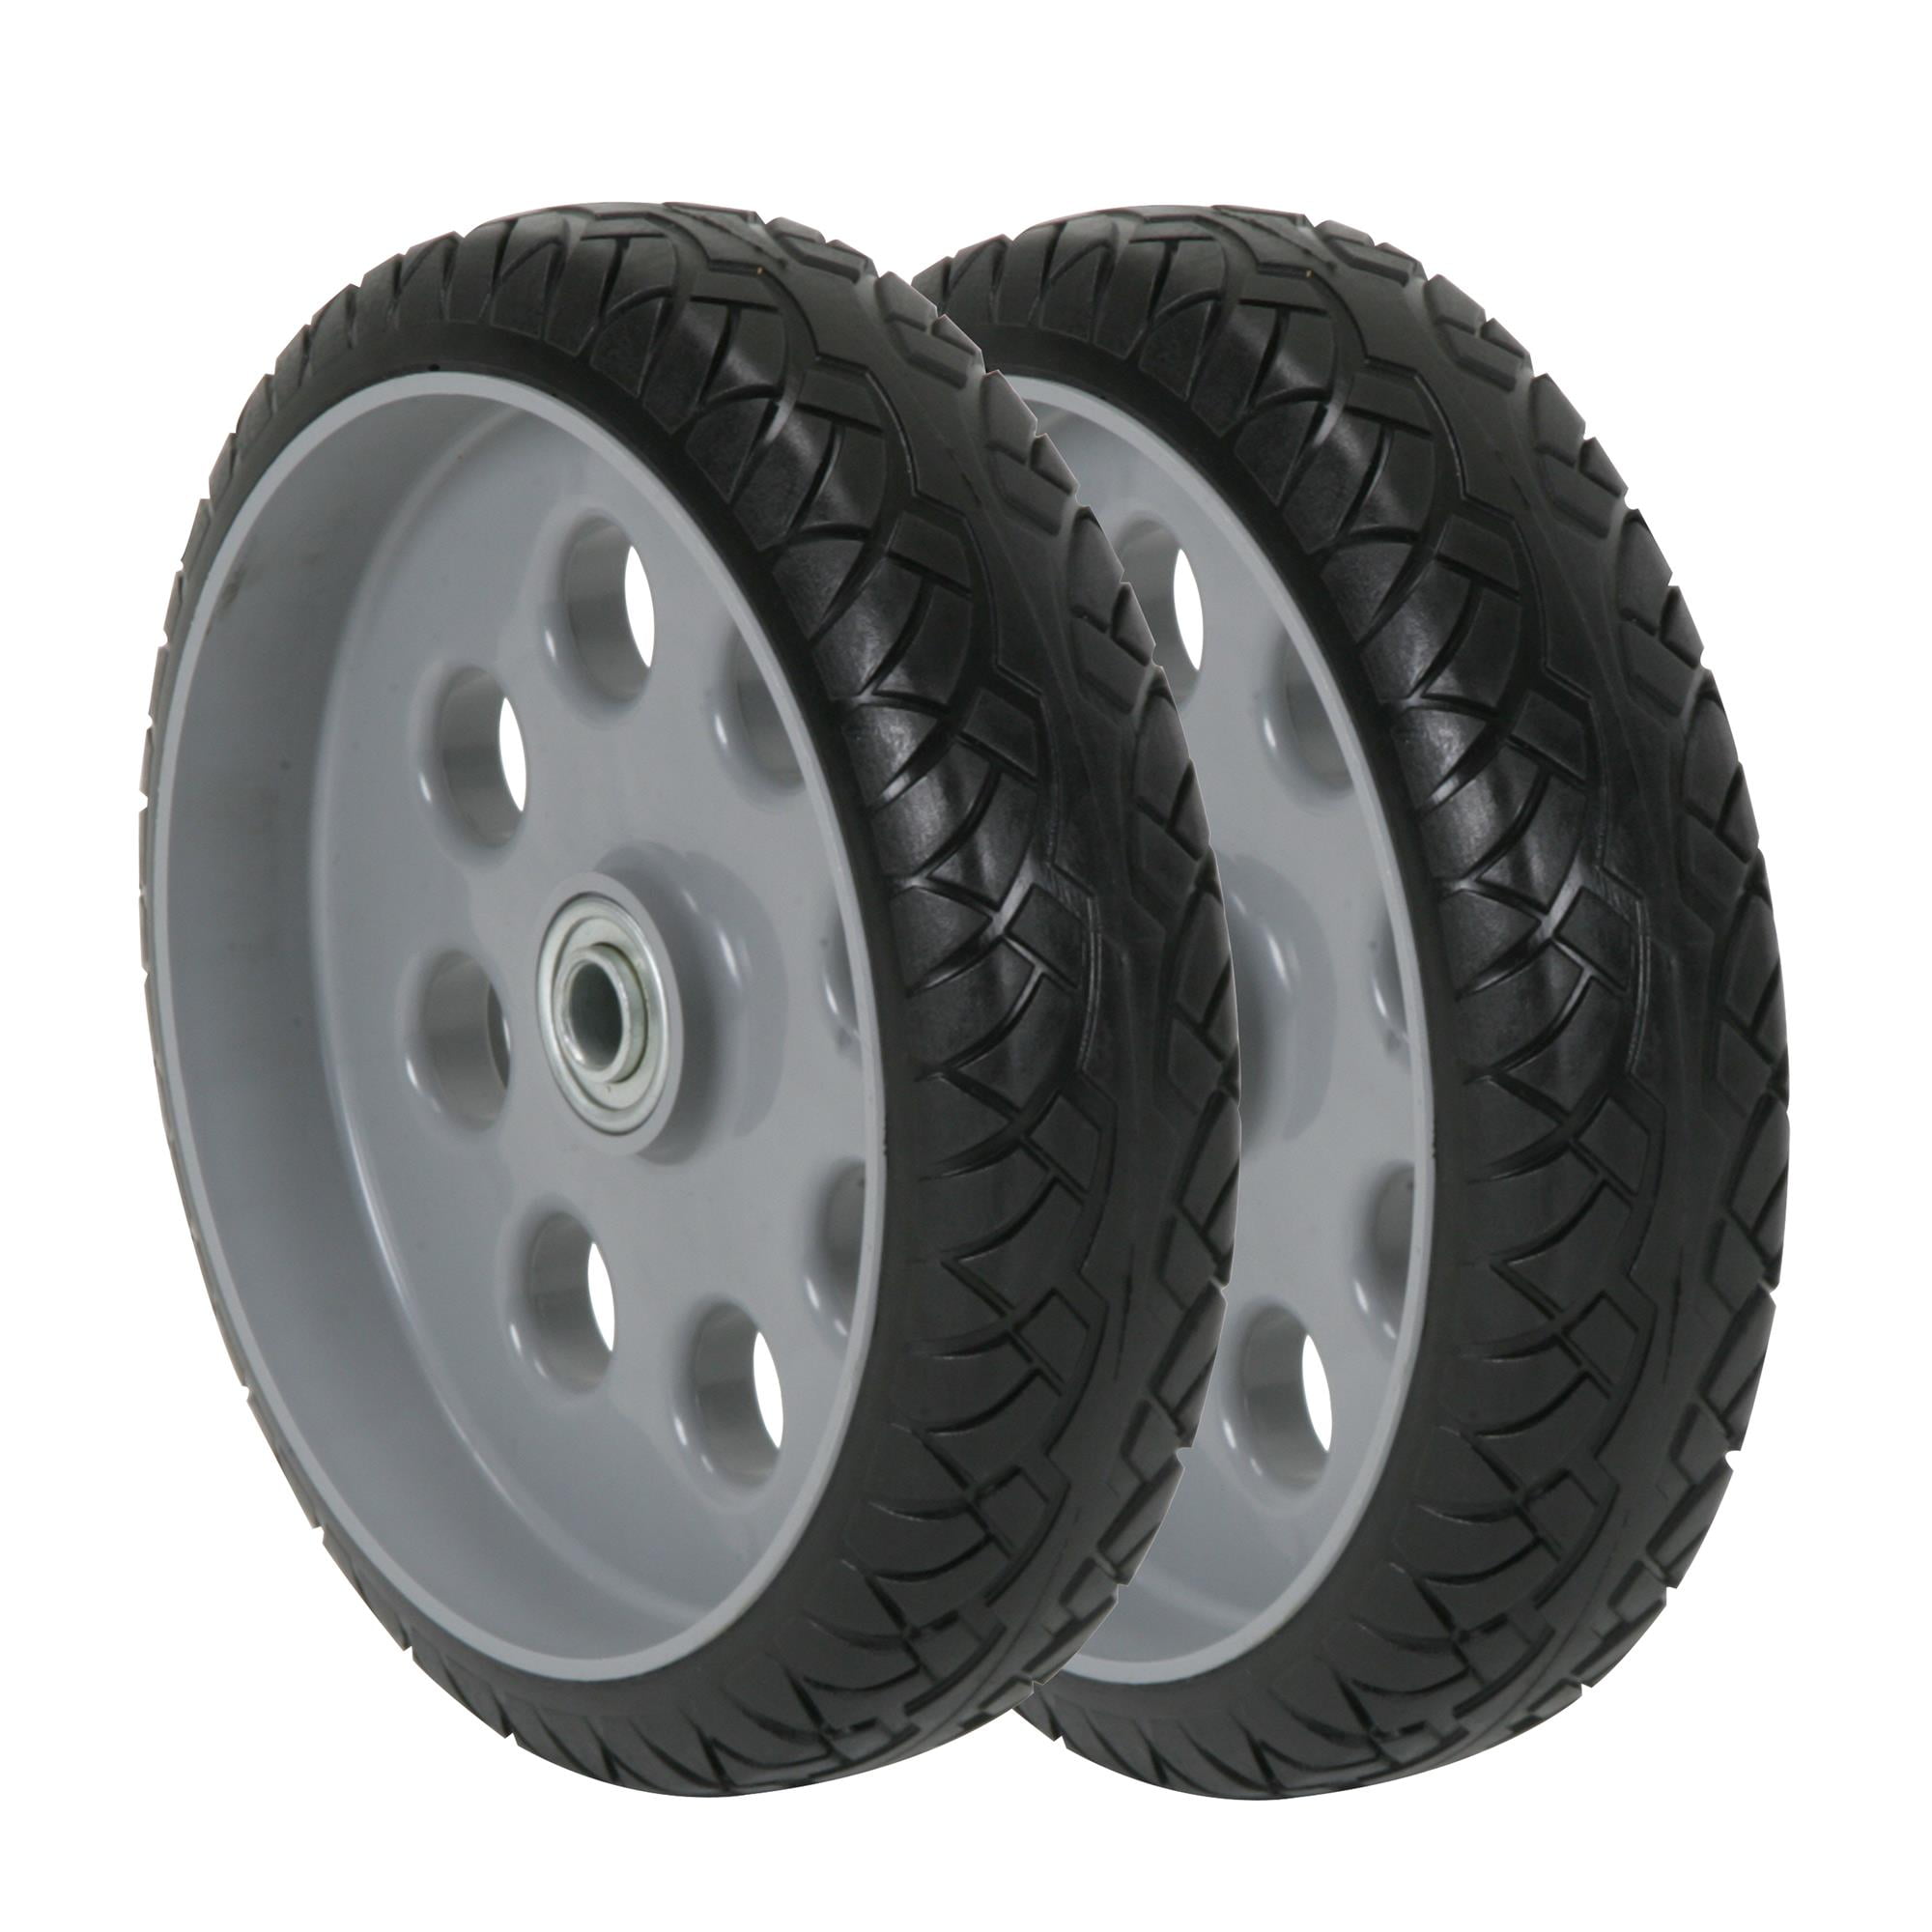 COSCO 10 Inch Low Profile Replacement Wheels for Hand Trucks, Flat-Free,  (Gray, 2 Pack)